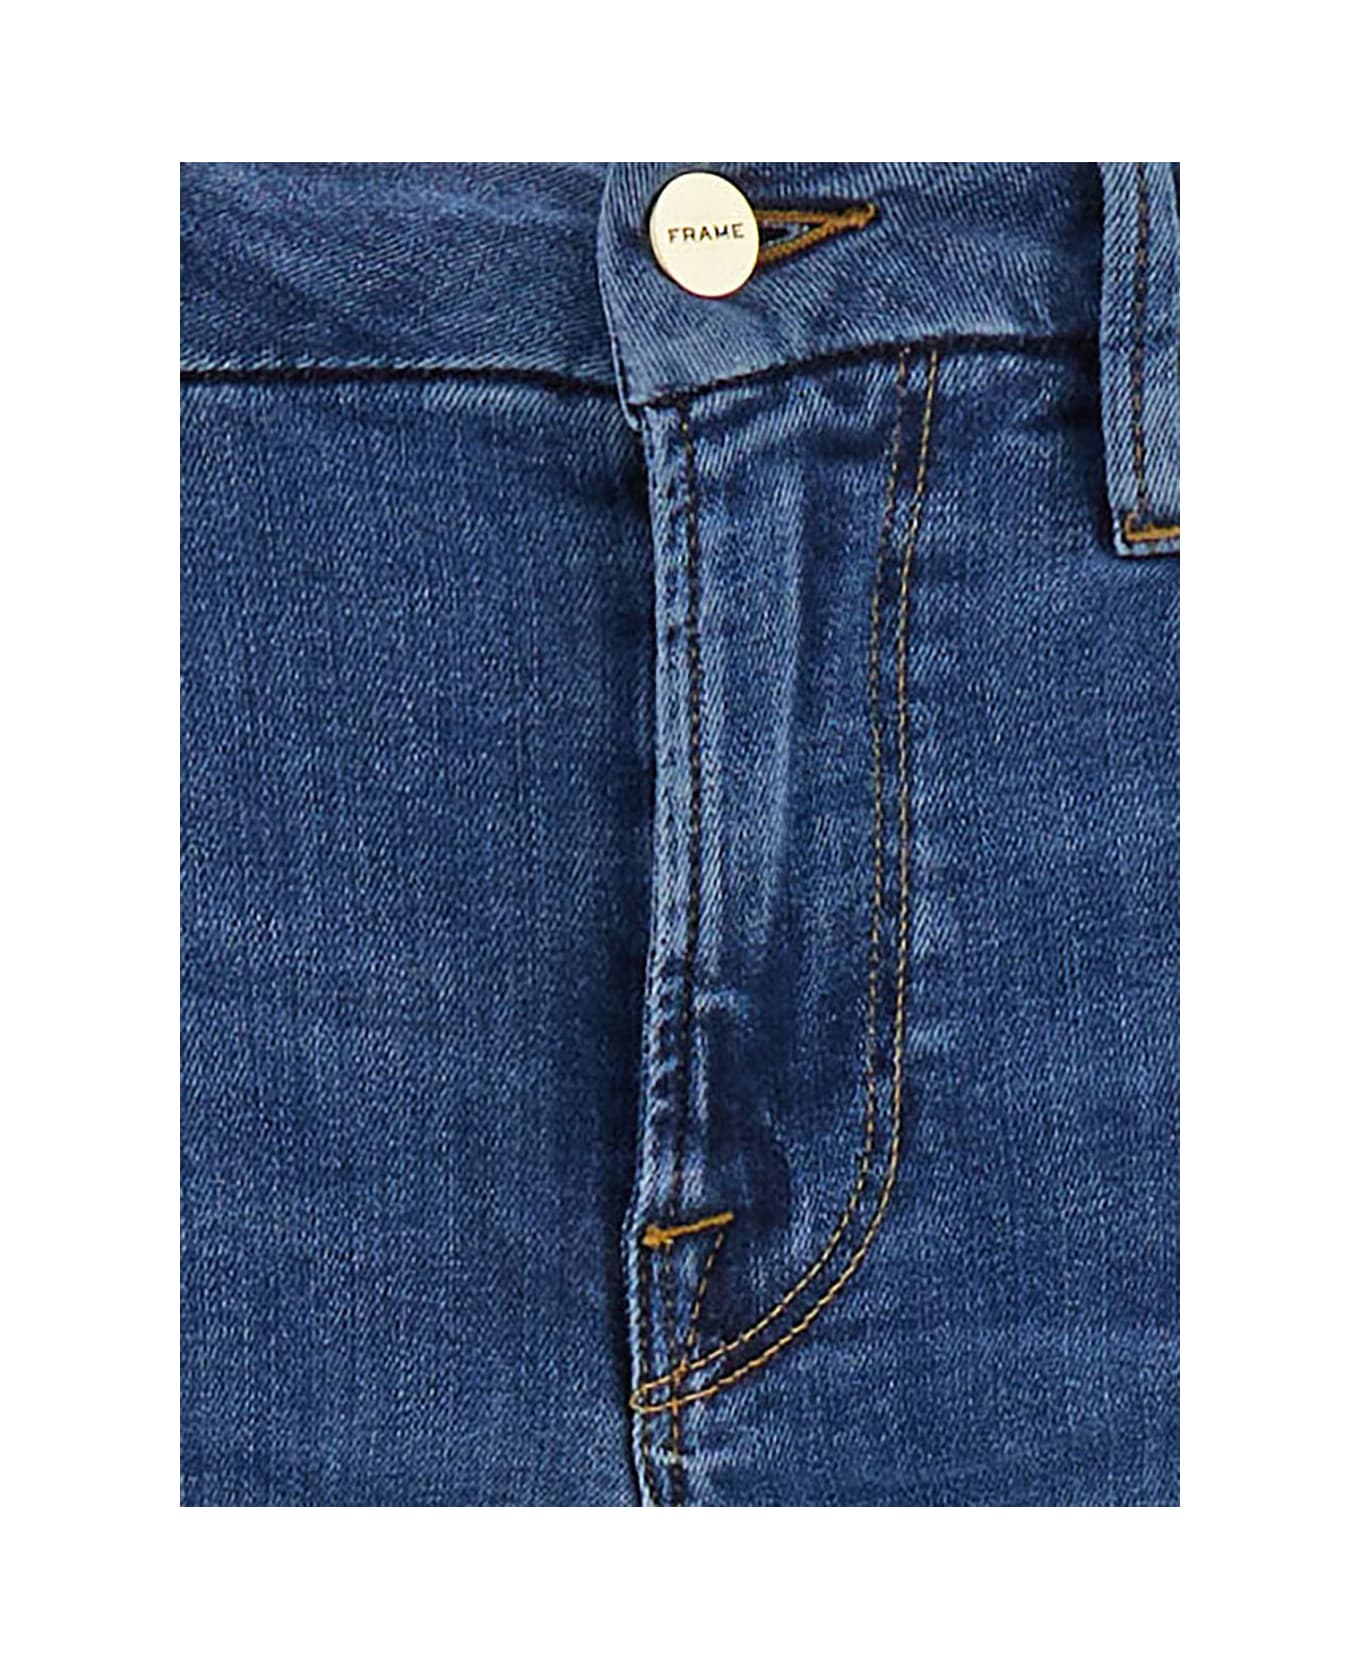 Frame 'mini Boot' Blue Flared Jeans With Branded Button In Cotton Blend Denim Woman - Blu デニム